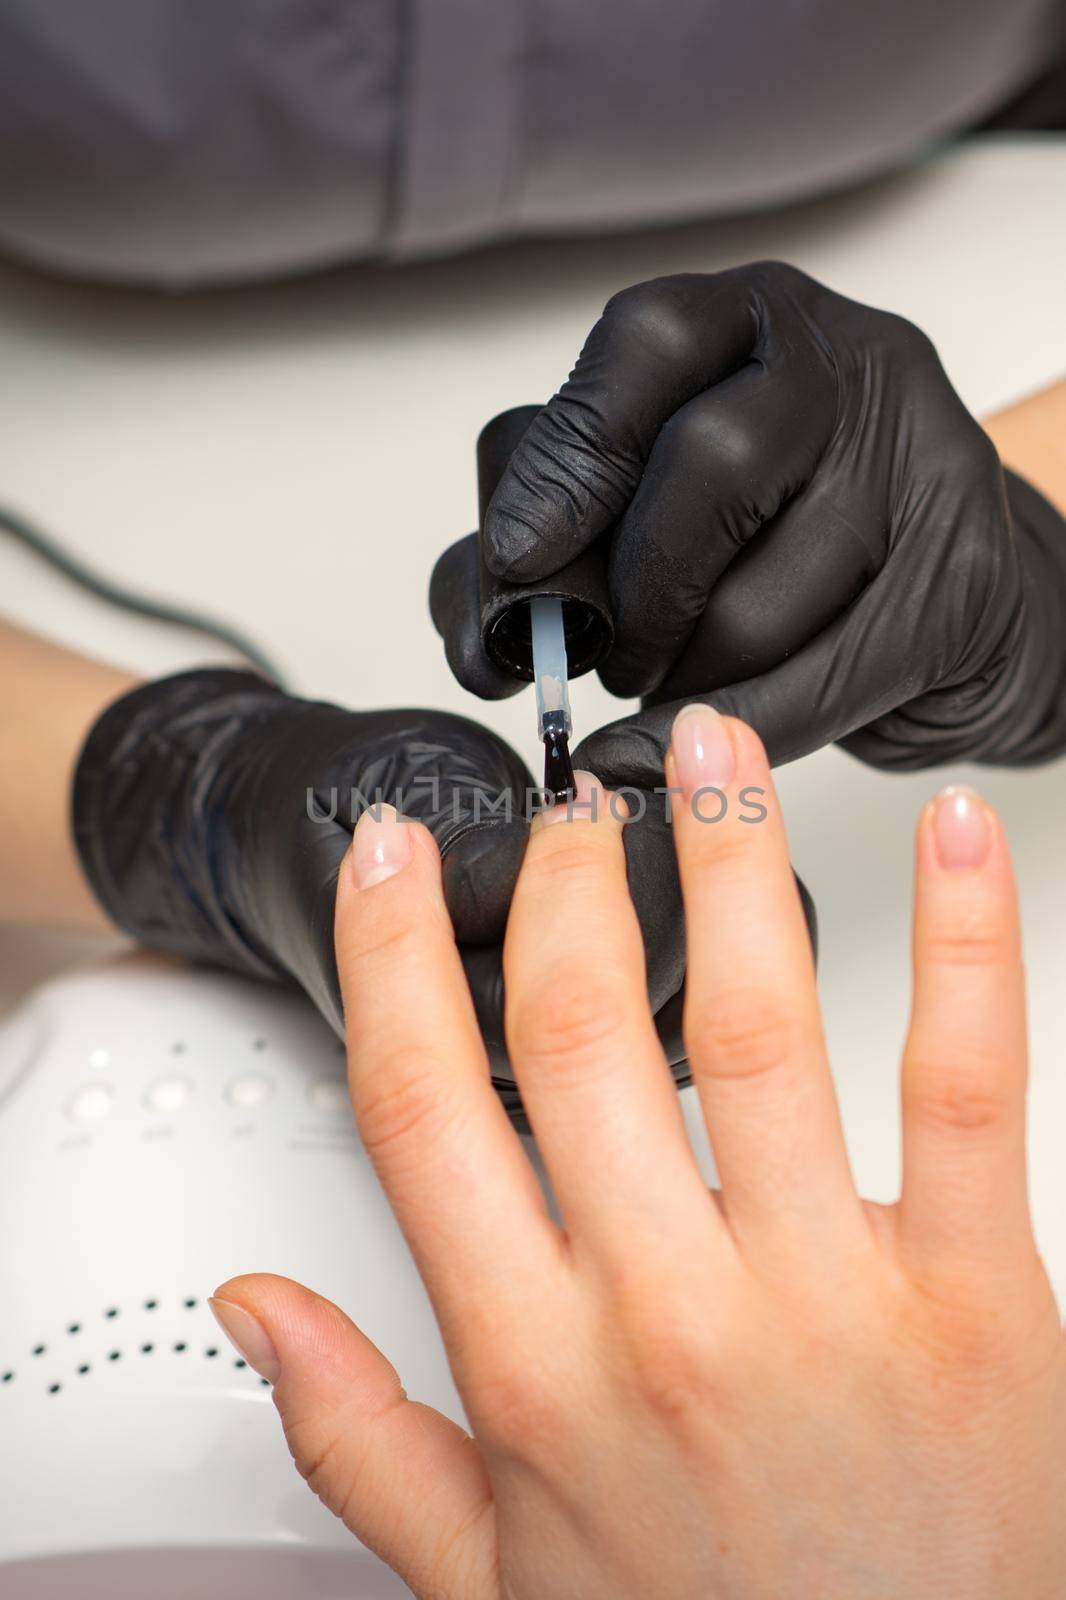 Painting nails of a woman. Hands of Manicurist in black gloves applying transparent nail polish on female Nails in a beauty salon